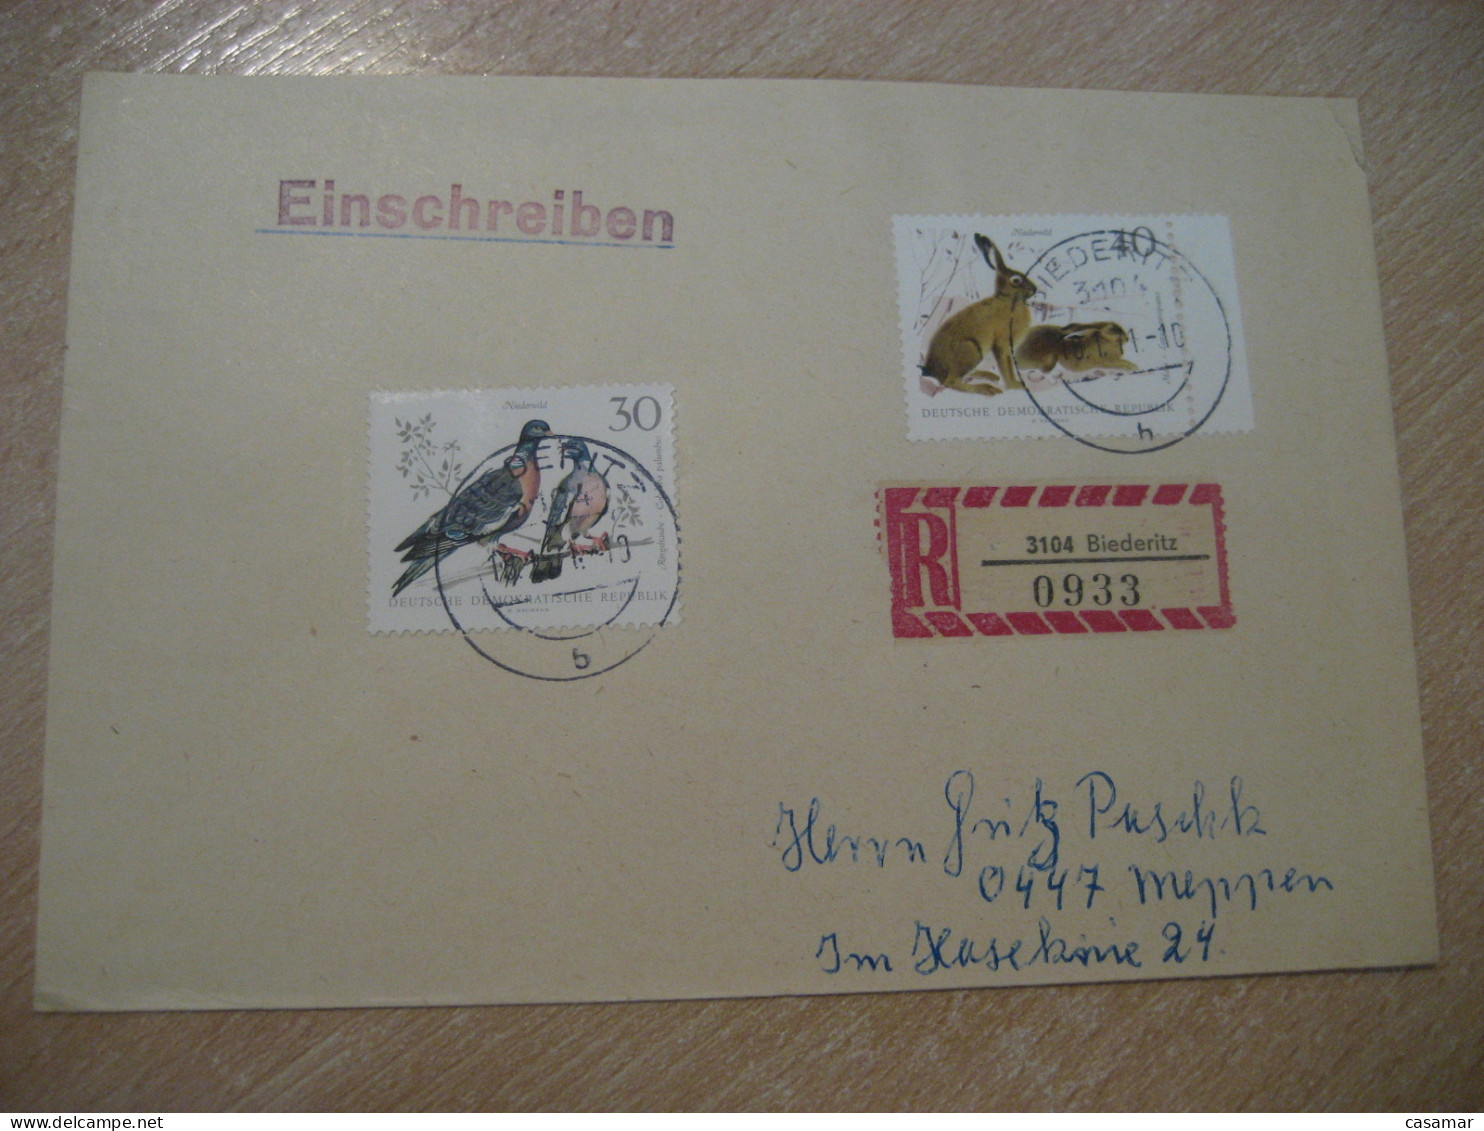 BIEDERITZ 1971 Rabbit Lapin Registered Cancel Cover DDR GERMANY - Conejos